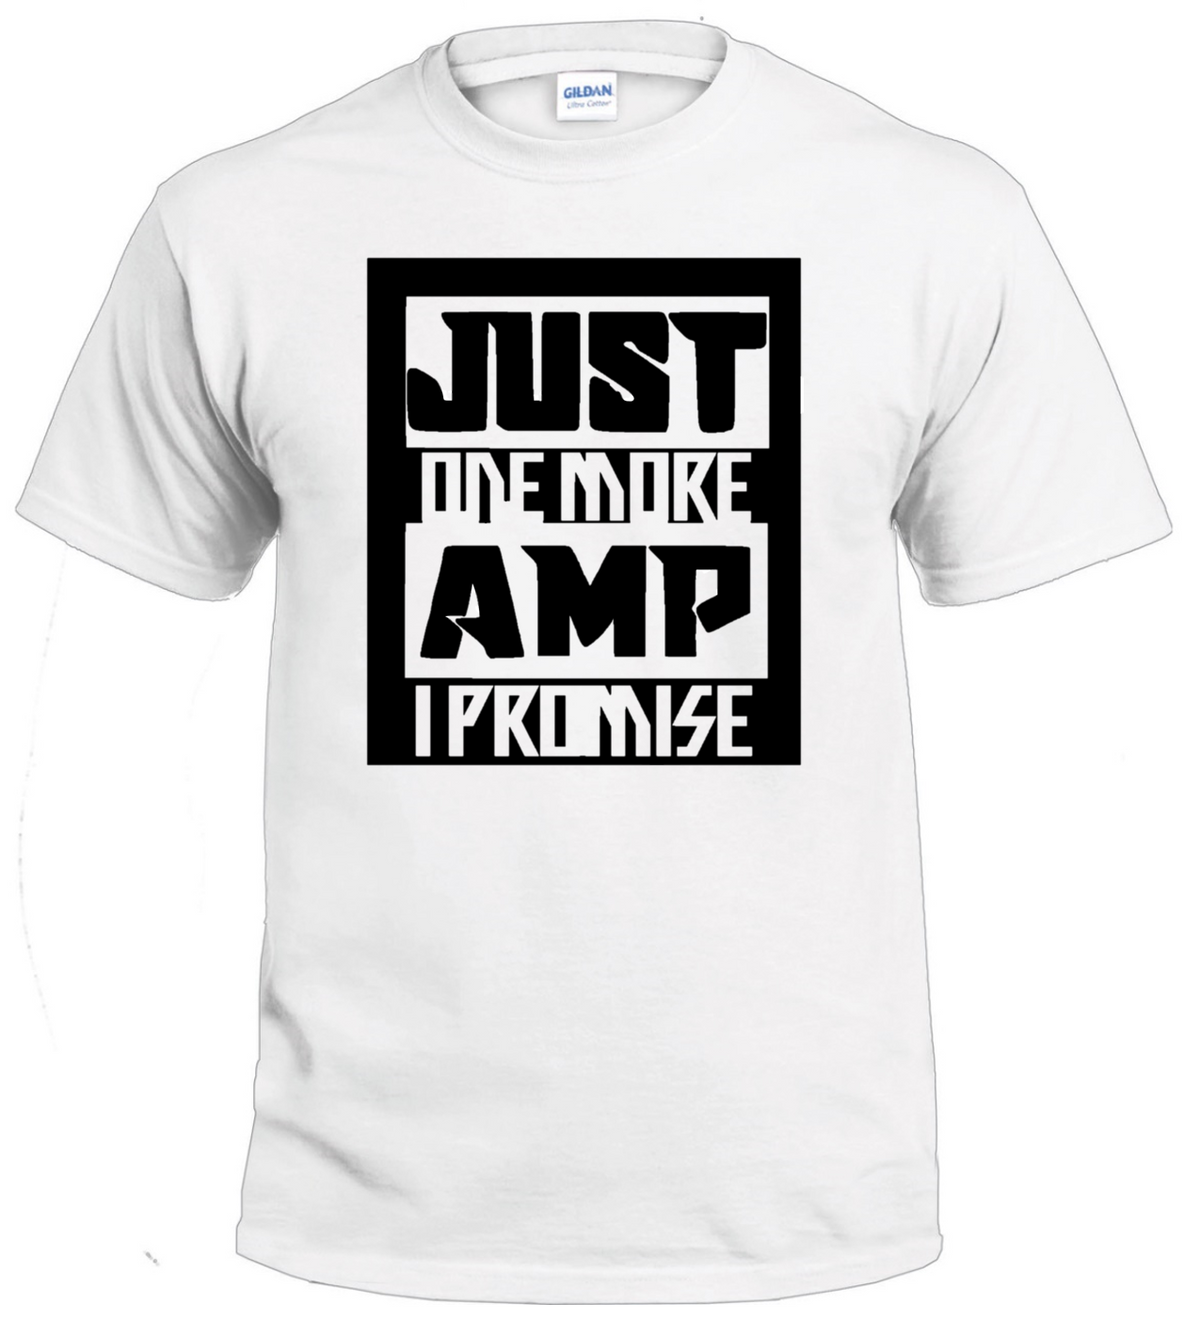 Just One More Amp t-shirt